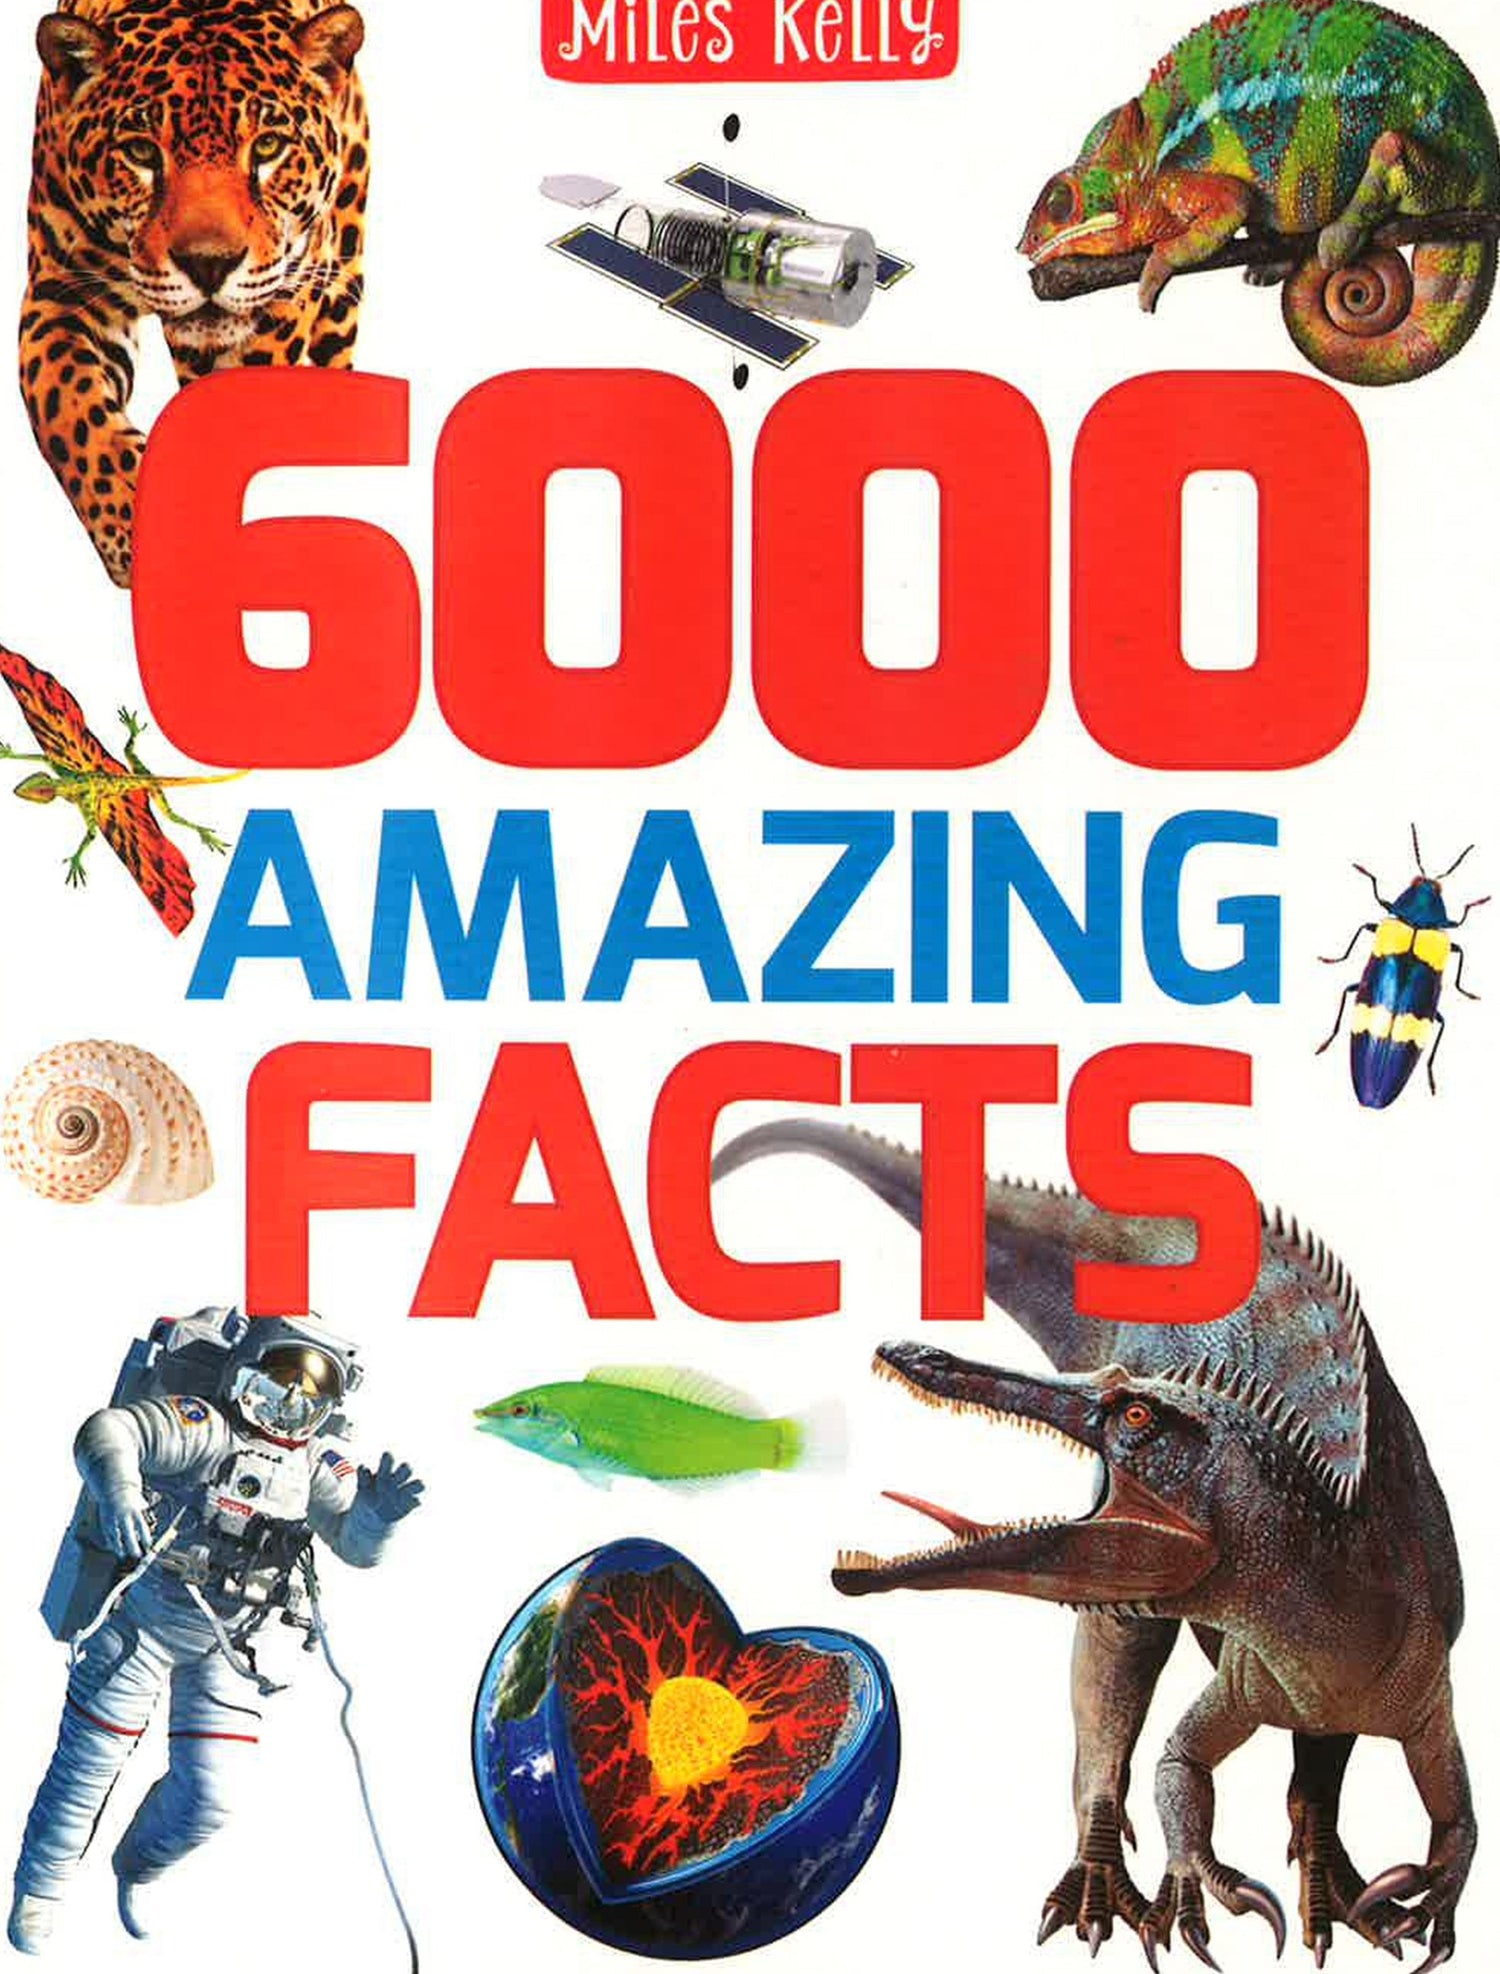 1,000 Amazing Weird Facts by DK: 9780744081442